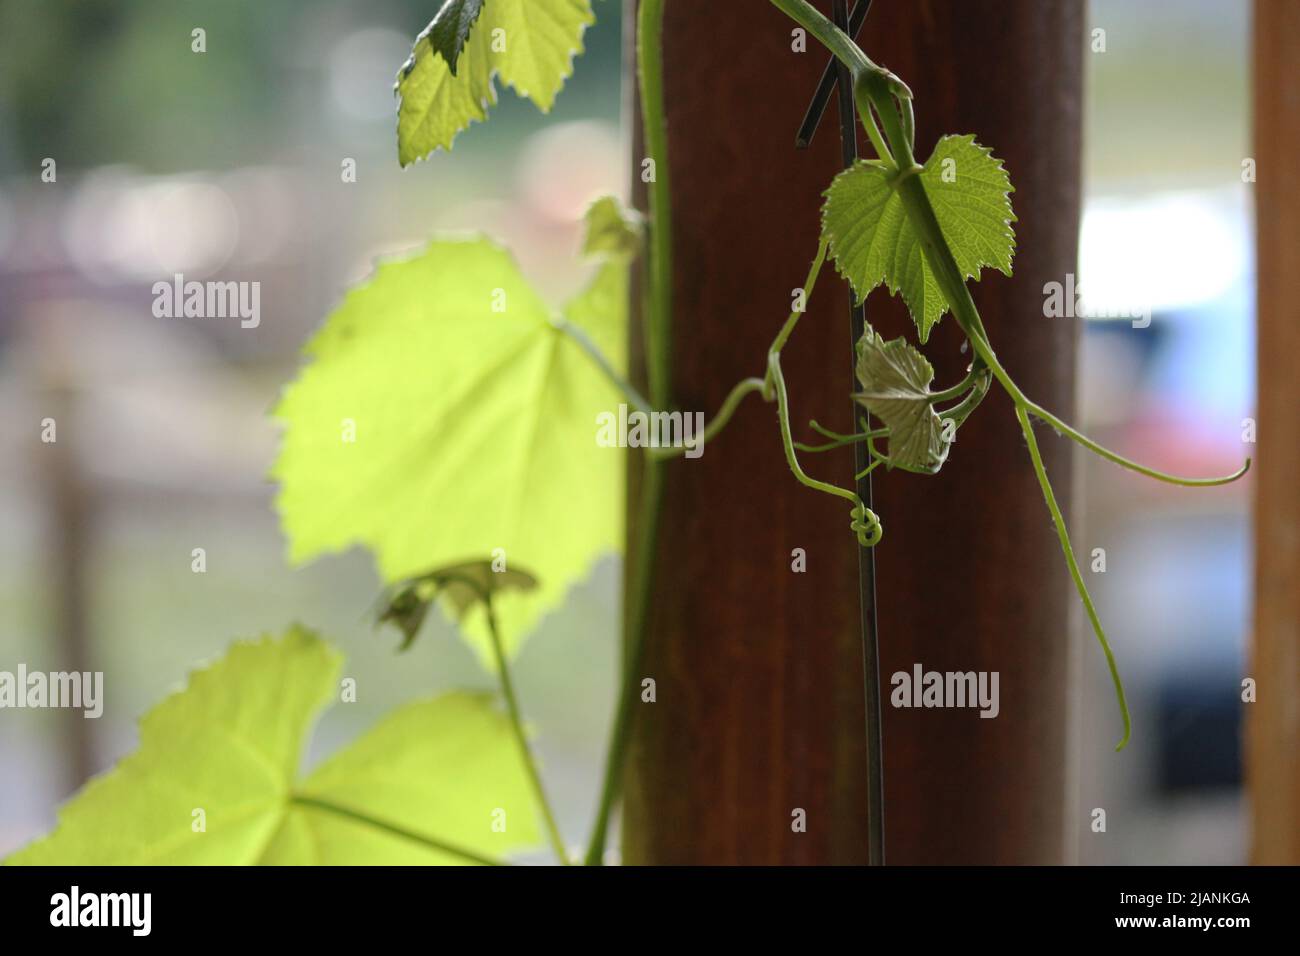 Selective focus on Young shoots of a vine, leaning against a wooden pole in growing Stock Photo